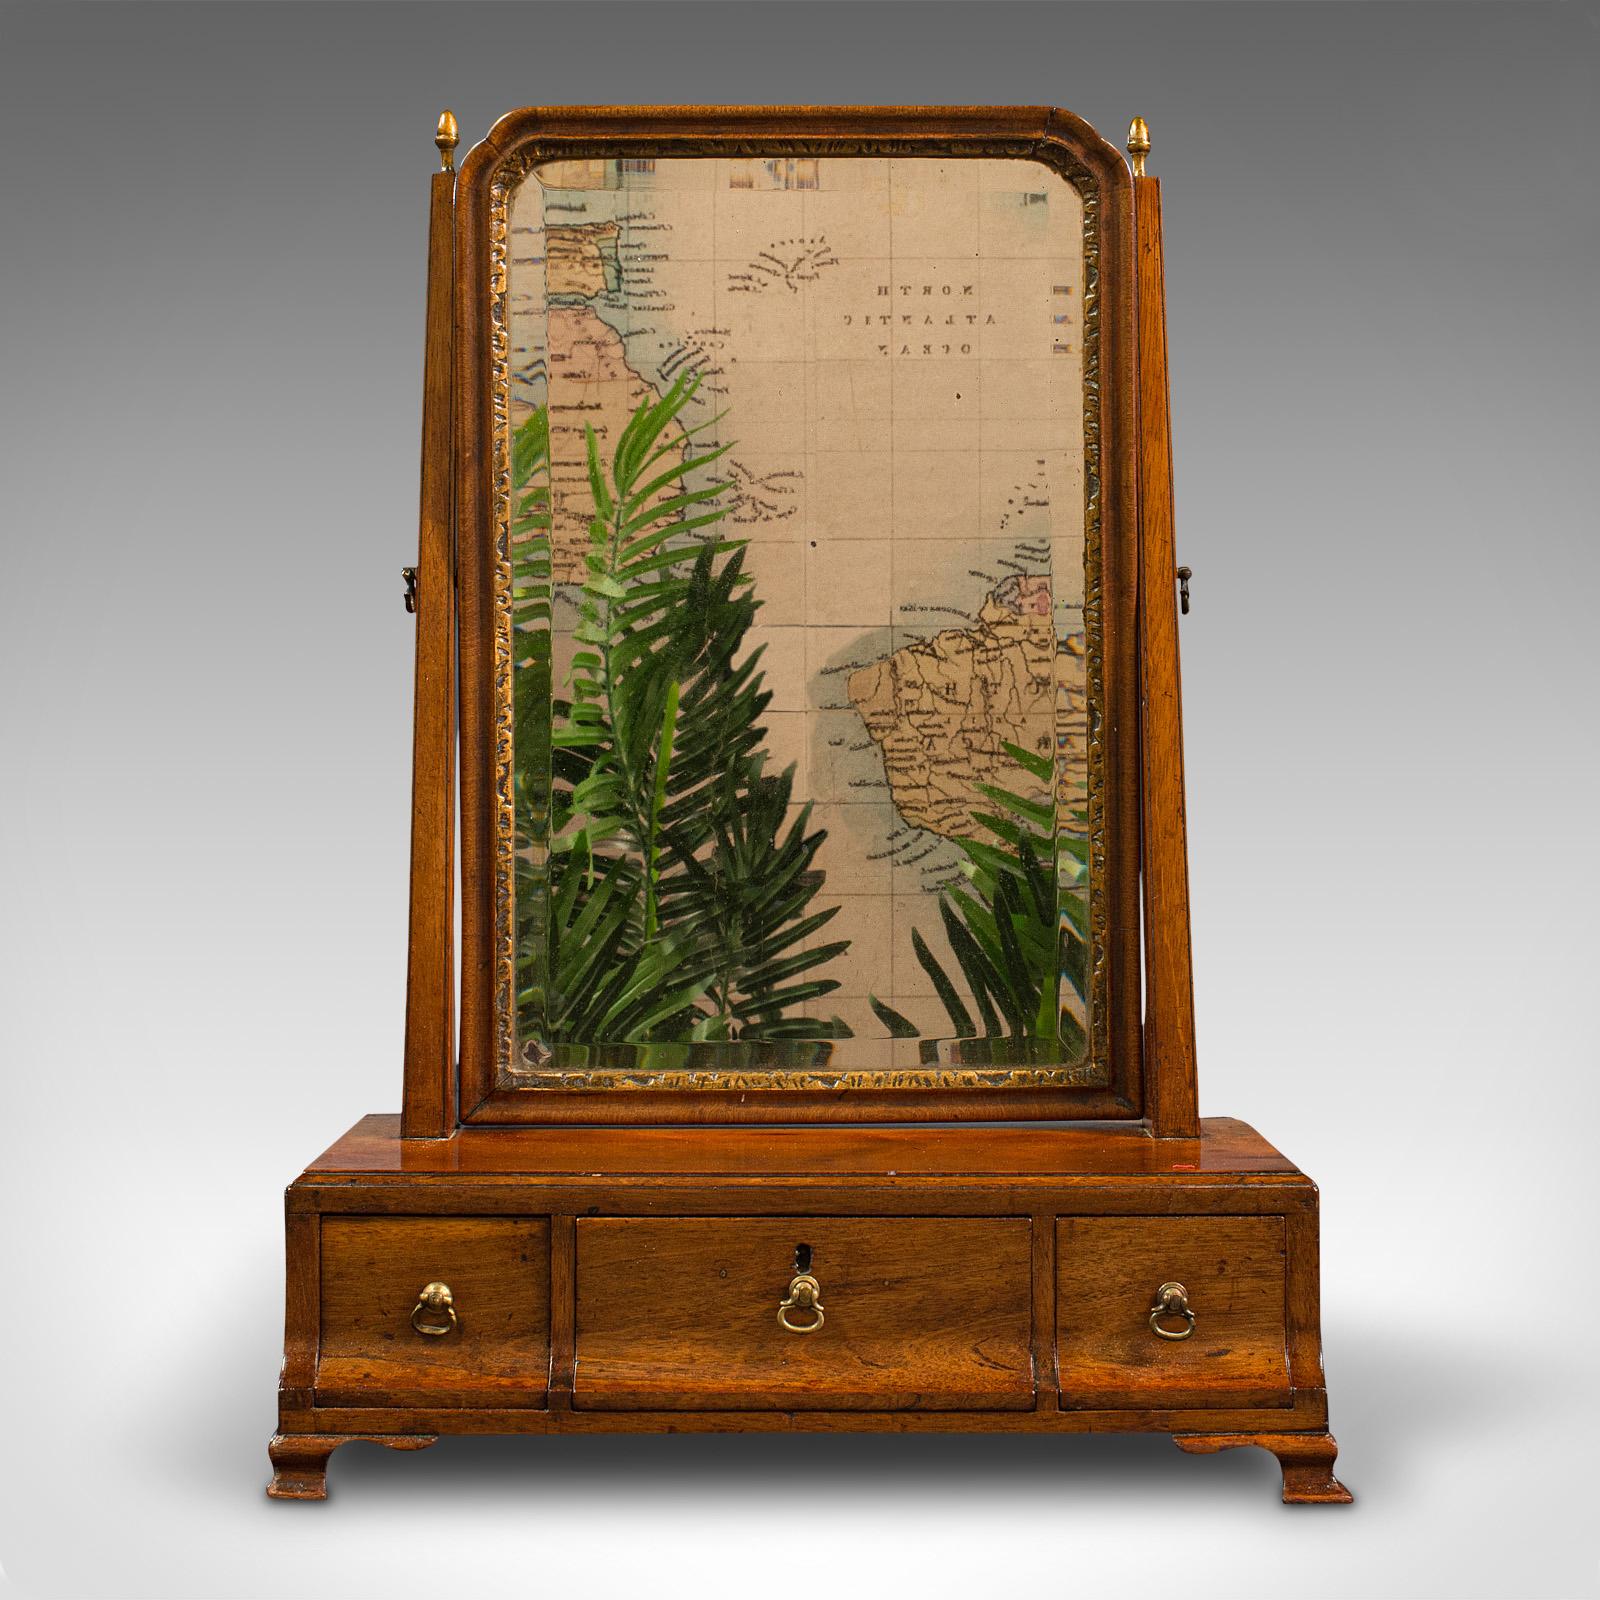 This is an antique bureau mirror. An English, walnut dressing table or swing mirror, dating to the Georgian period, circa 1800.

Delightfully crafted mirror with fine colour and finish
Displays a desirable aged patina and in good order
Select